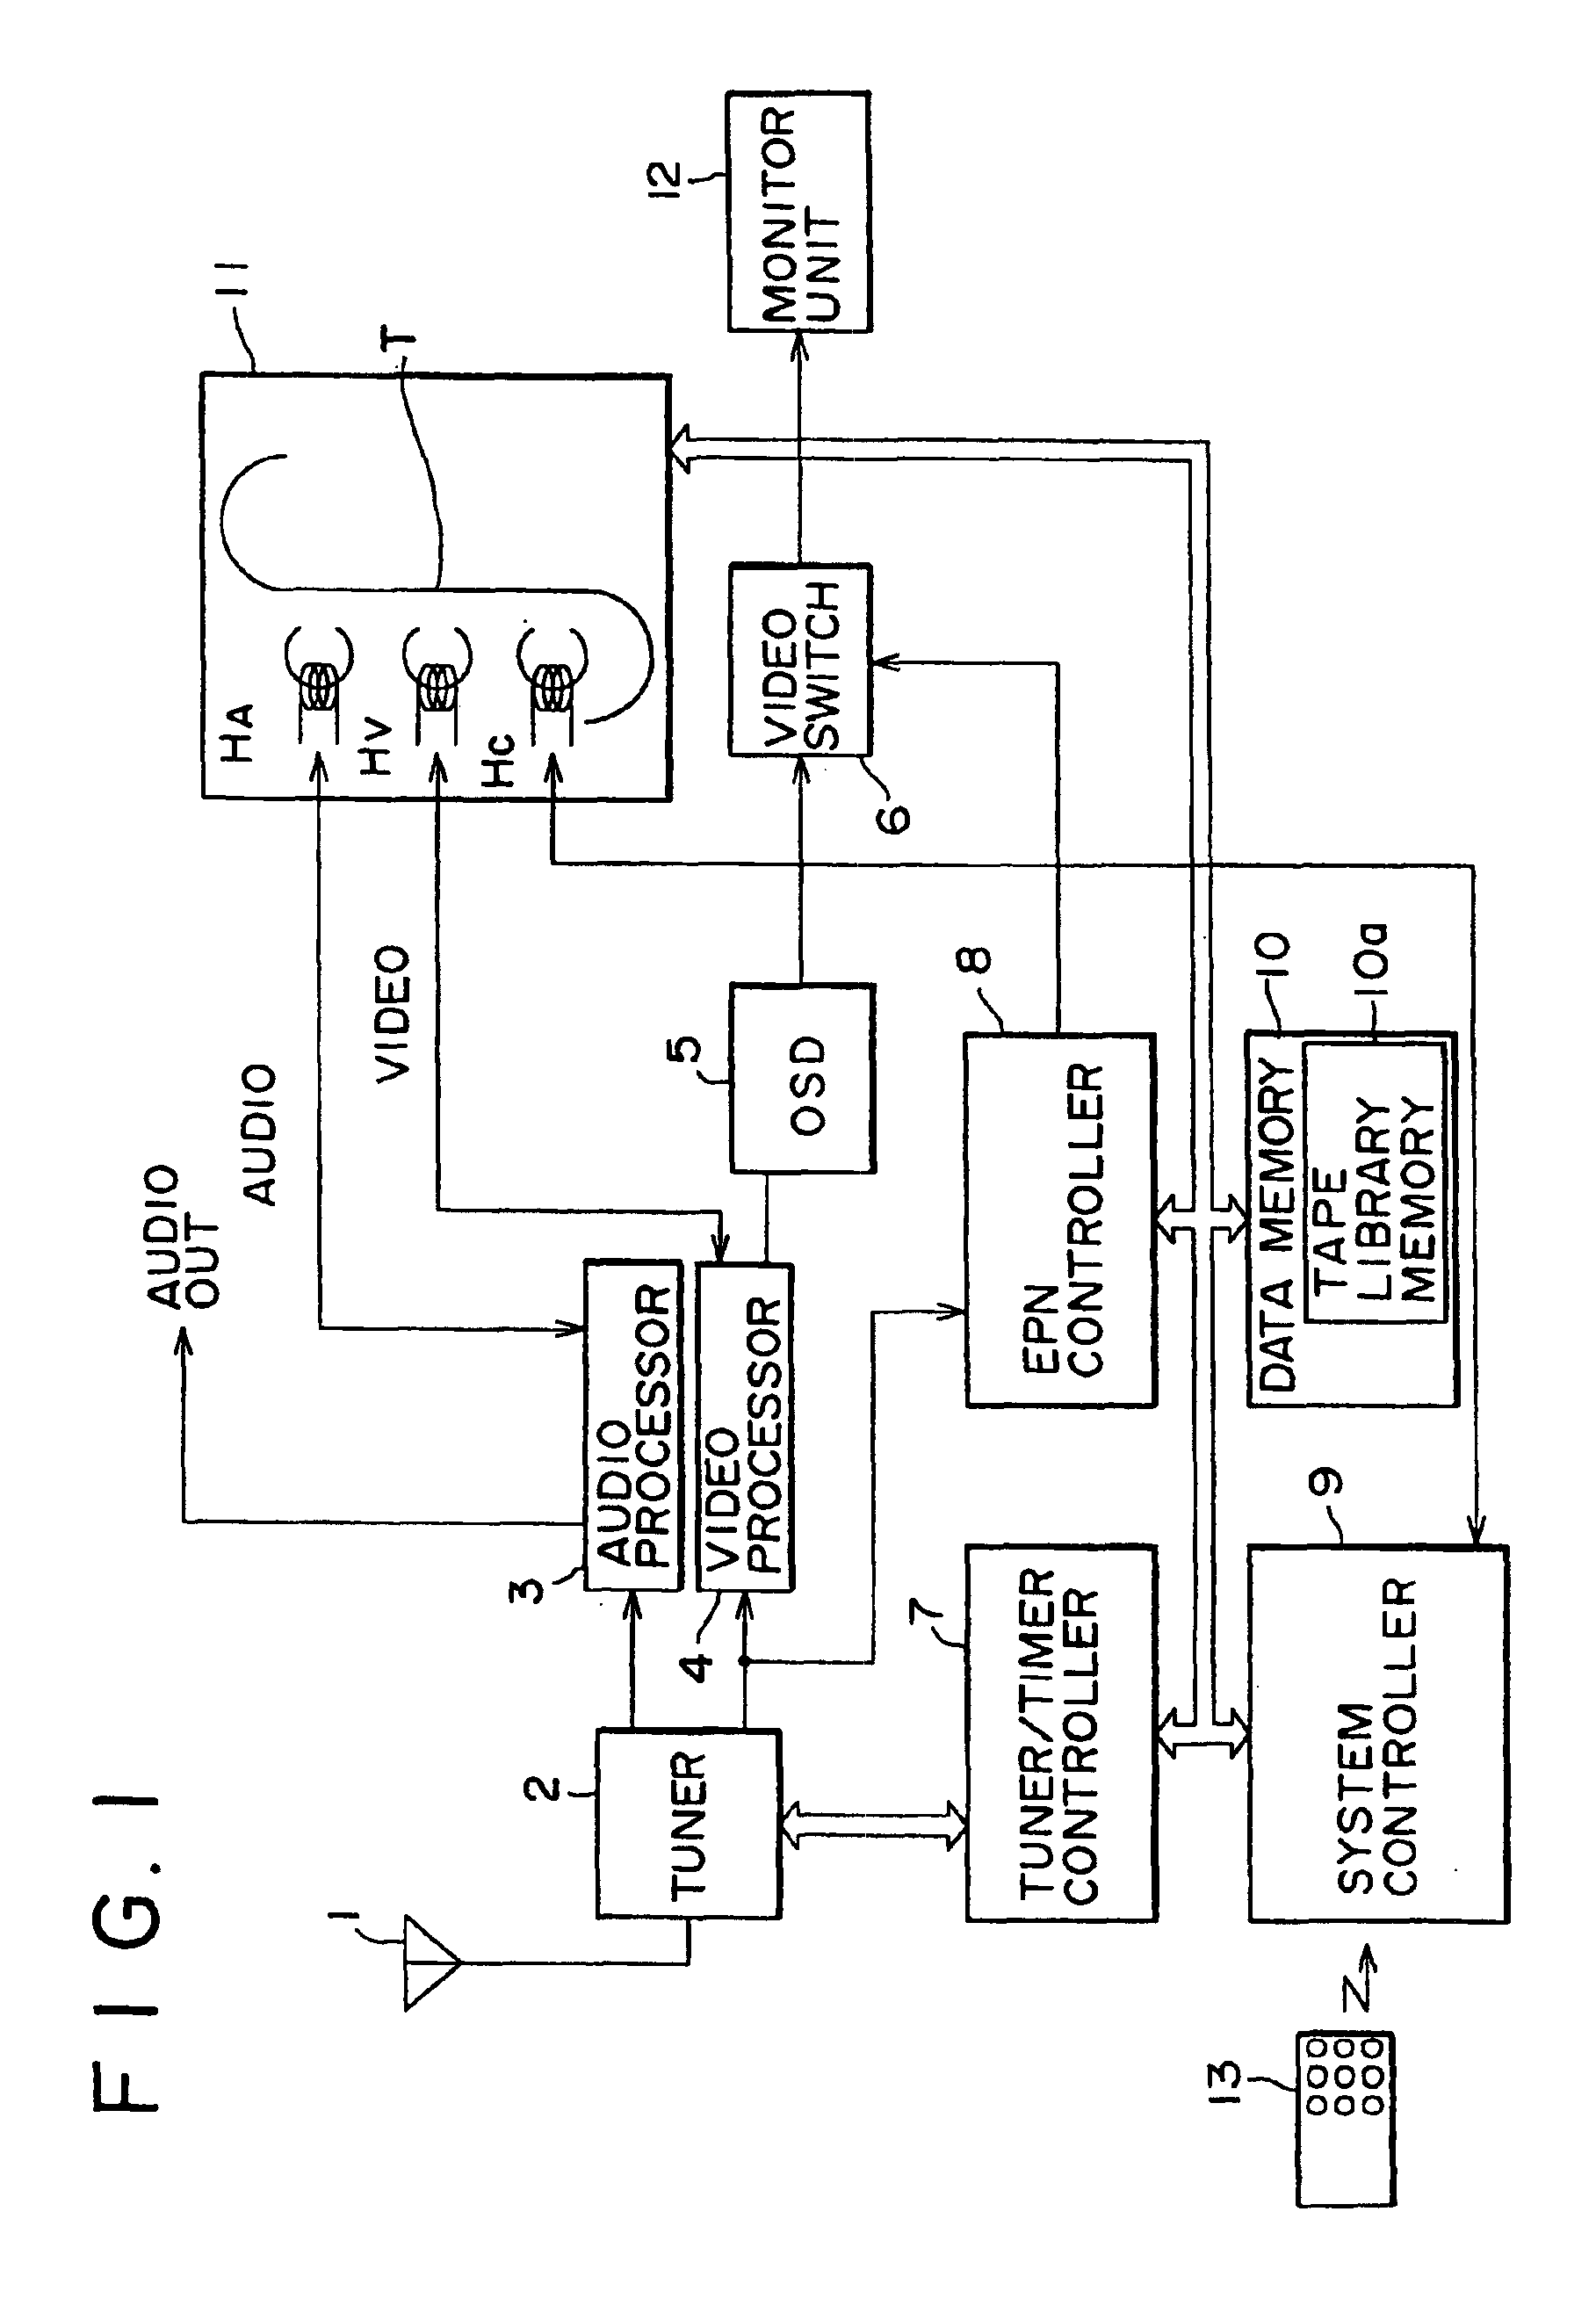 Apparatus and method for controlling display of electrical program guide